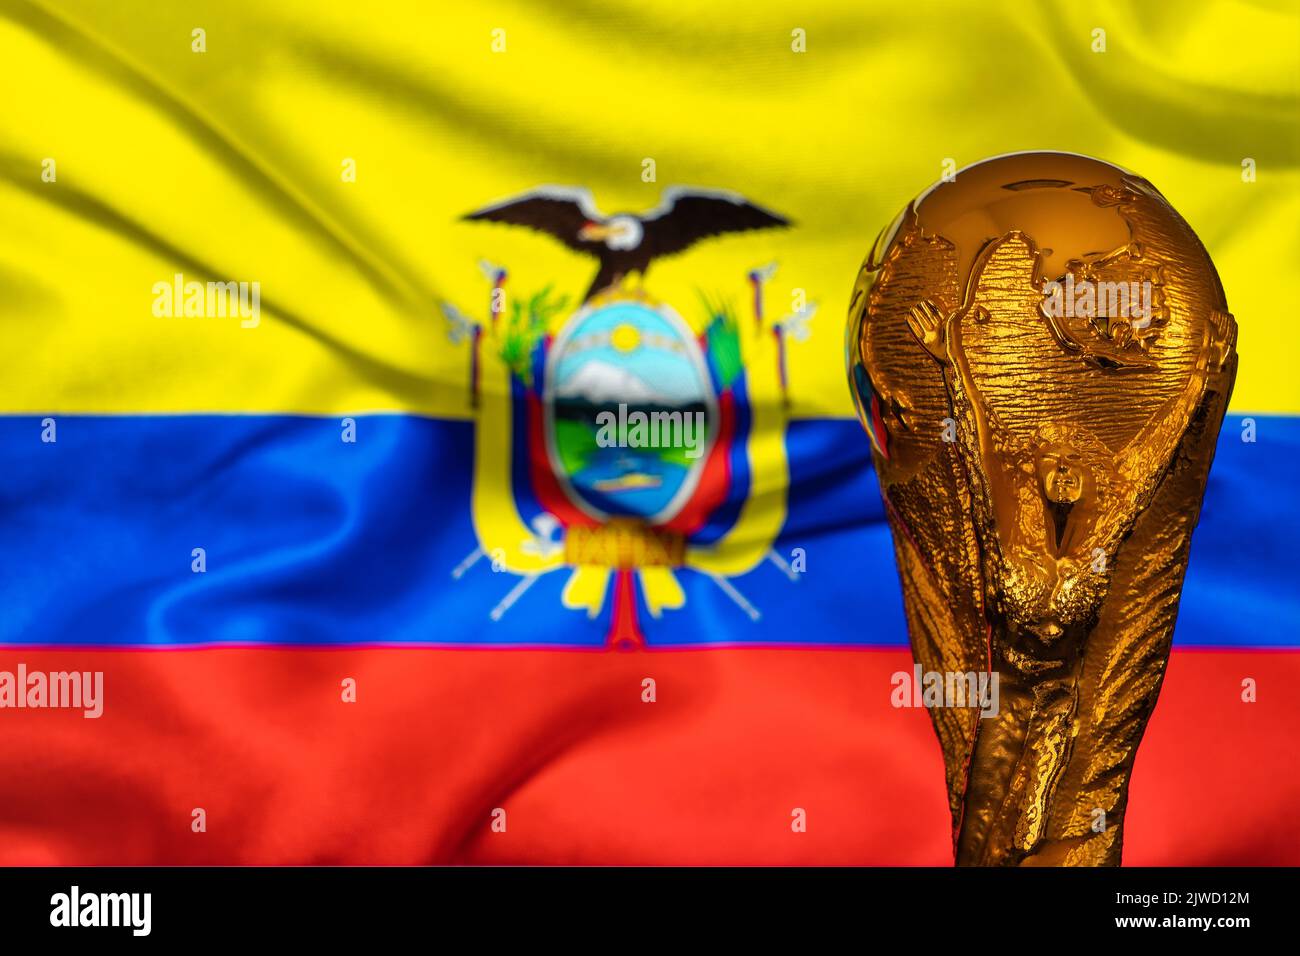 Doha, Qatar - September 4, 2022: FIFA World Cup trophy against the background of Ecuador flag. Stock Photo